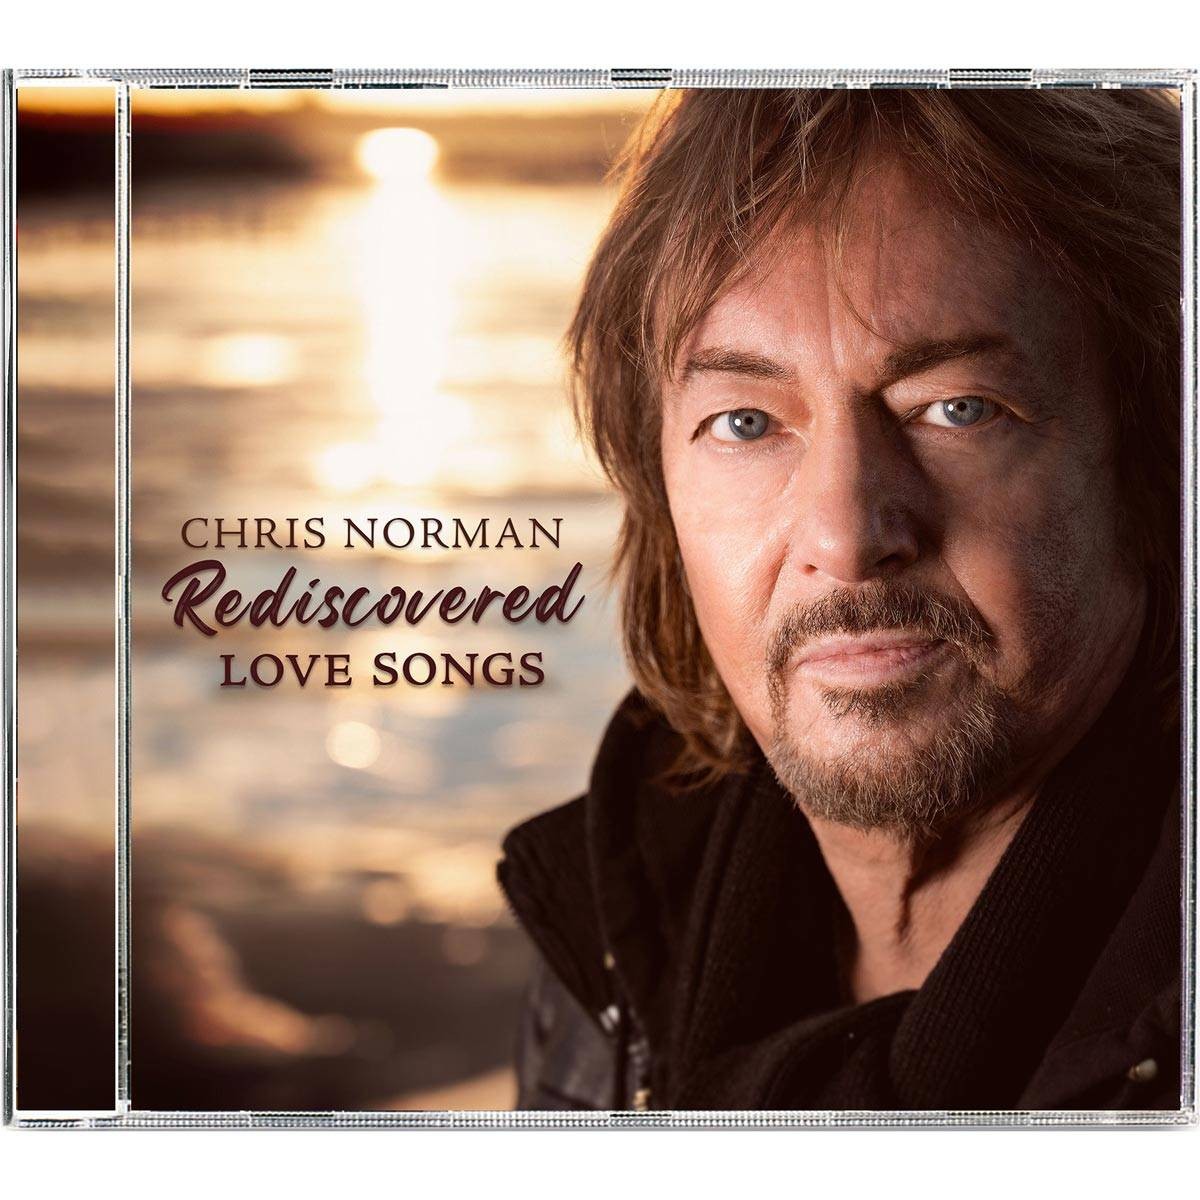 Chris Norman: Rediscovered Love Songs